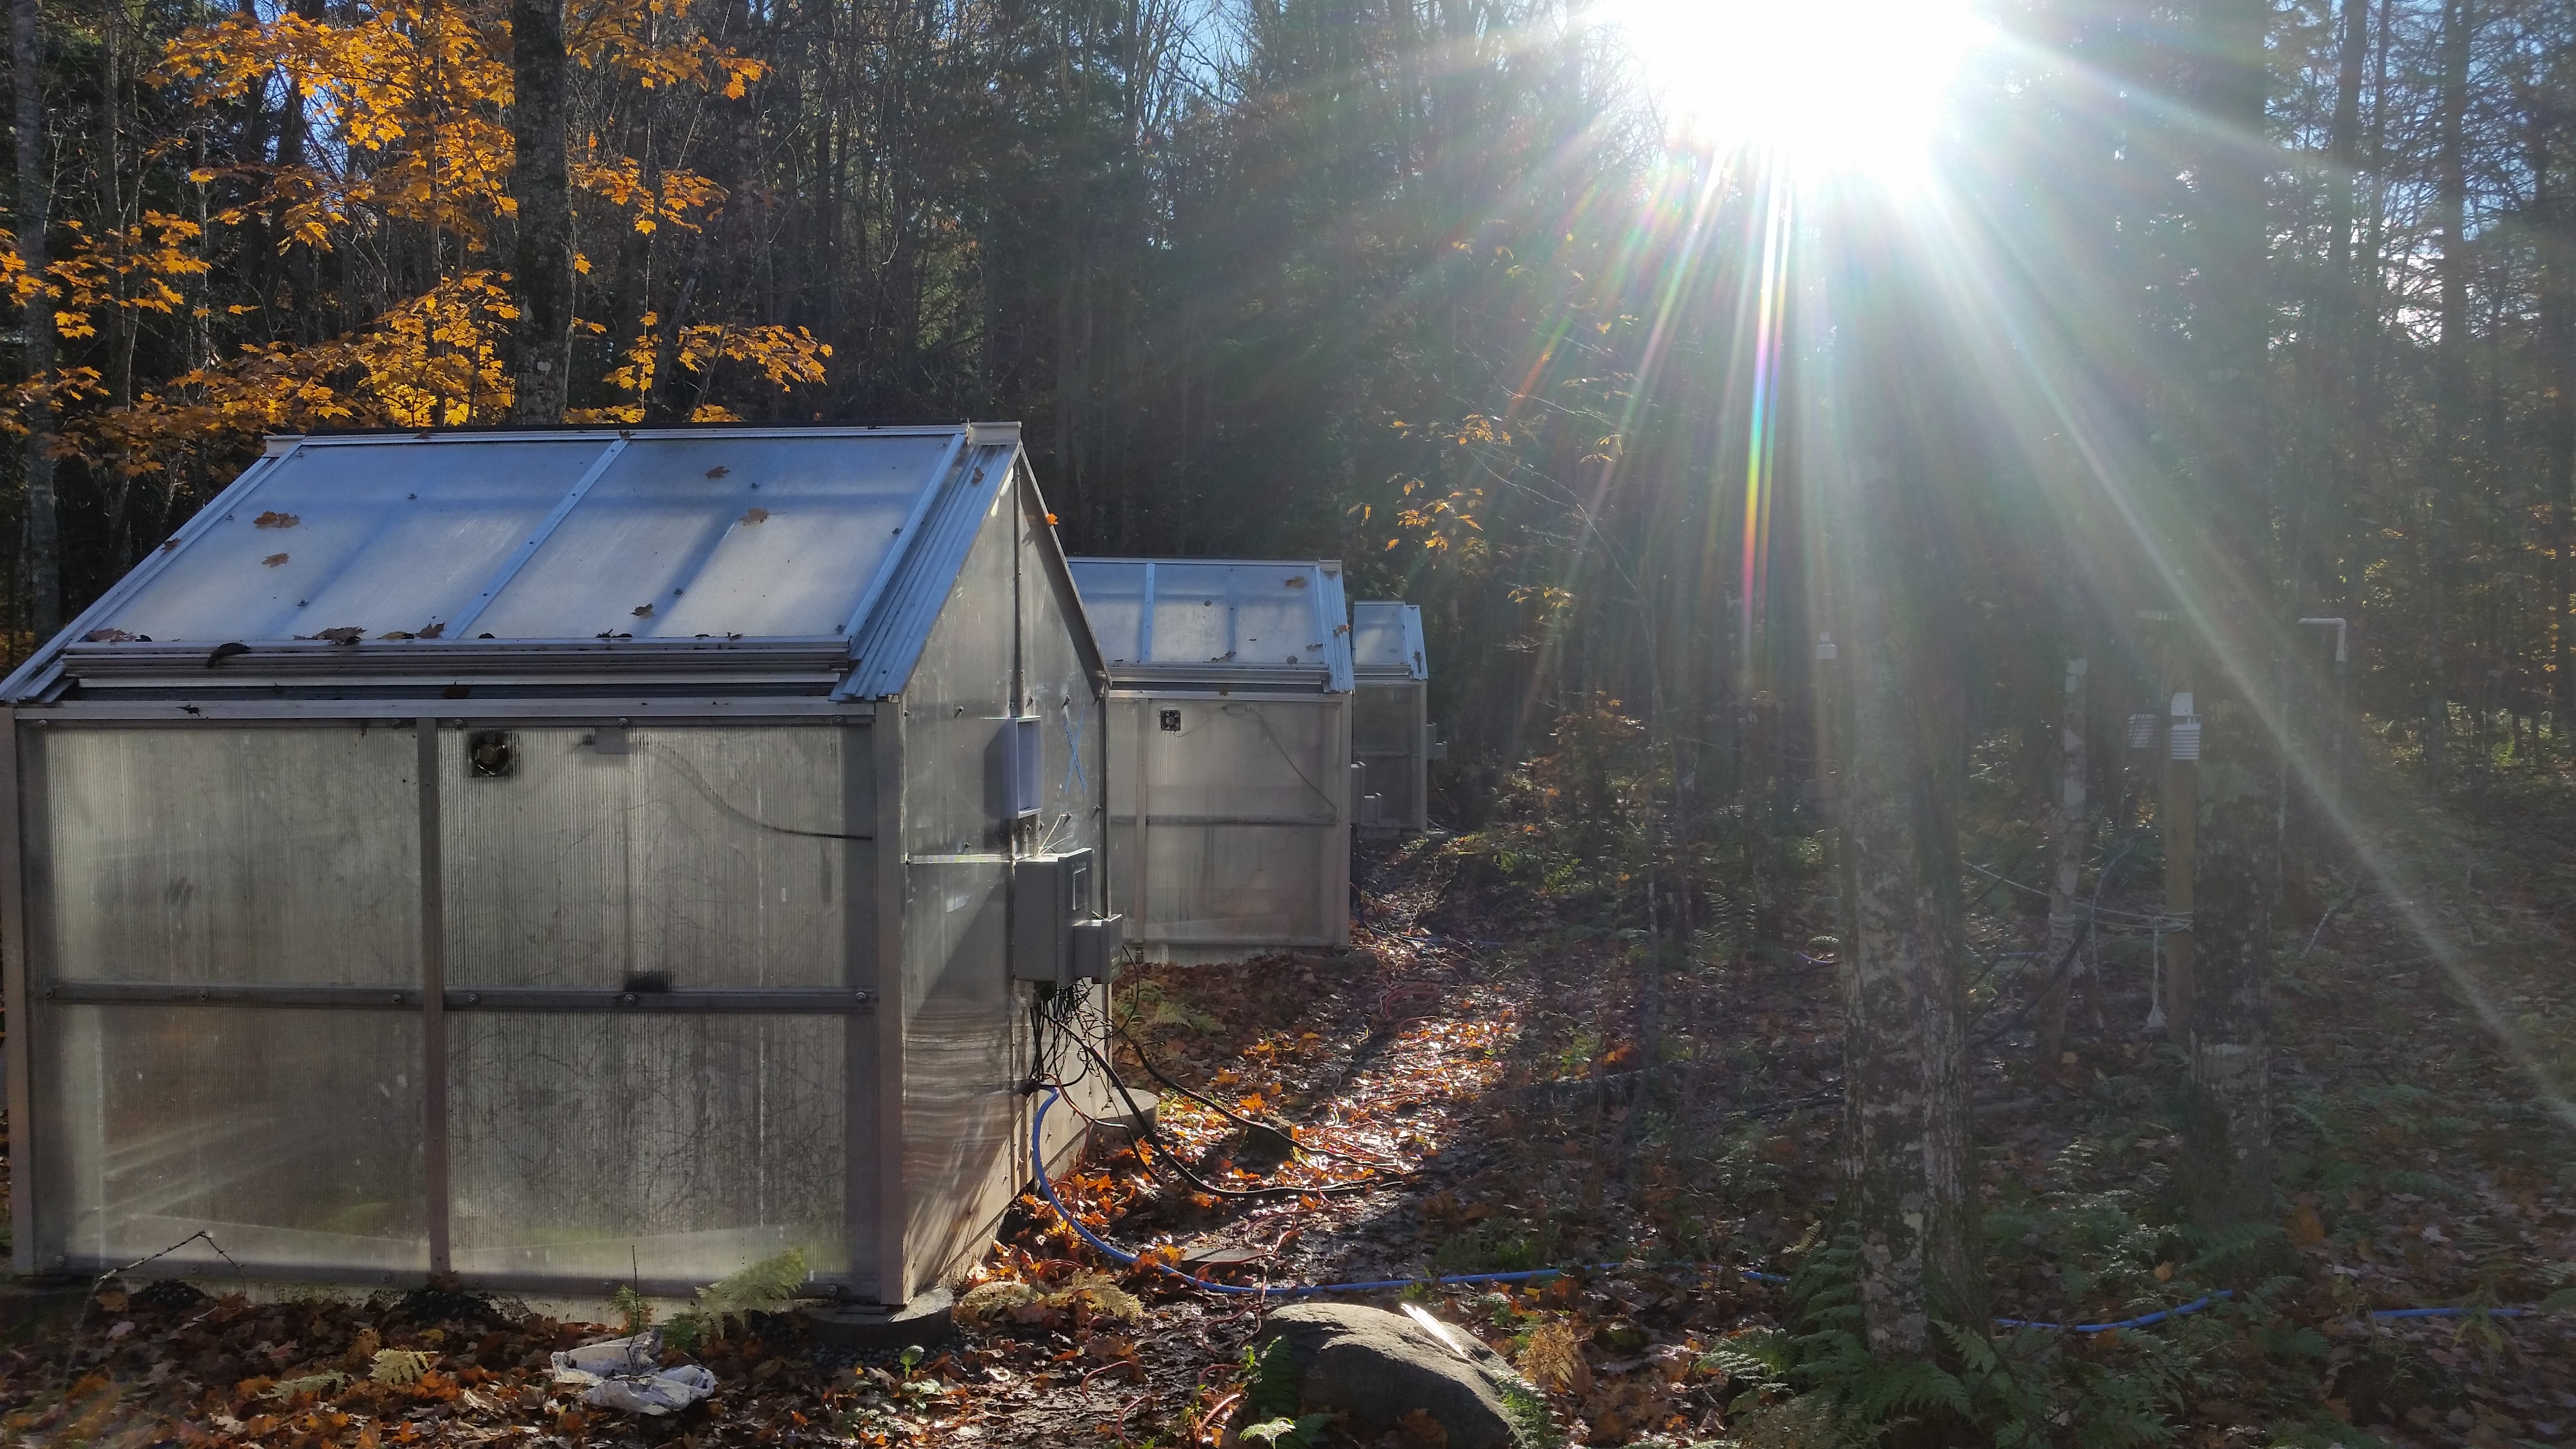 One micro greenhouse in Houghton captures current conditions, while two others on the site reflect climate change scenarios.